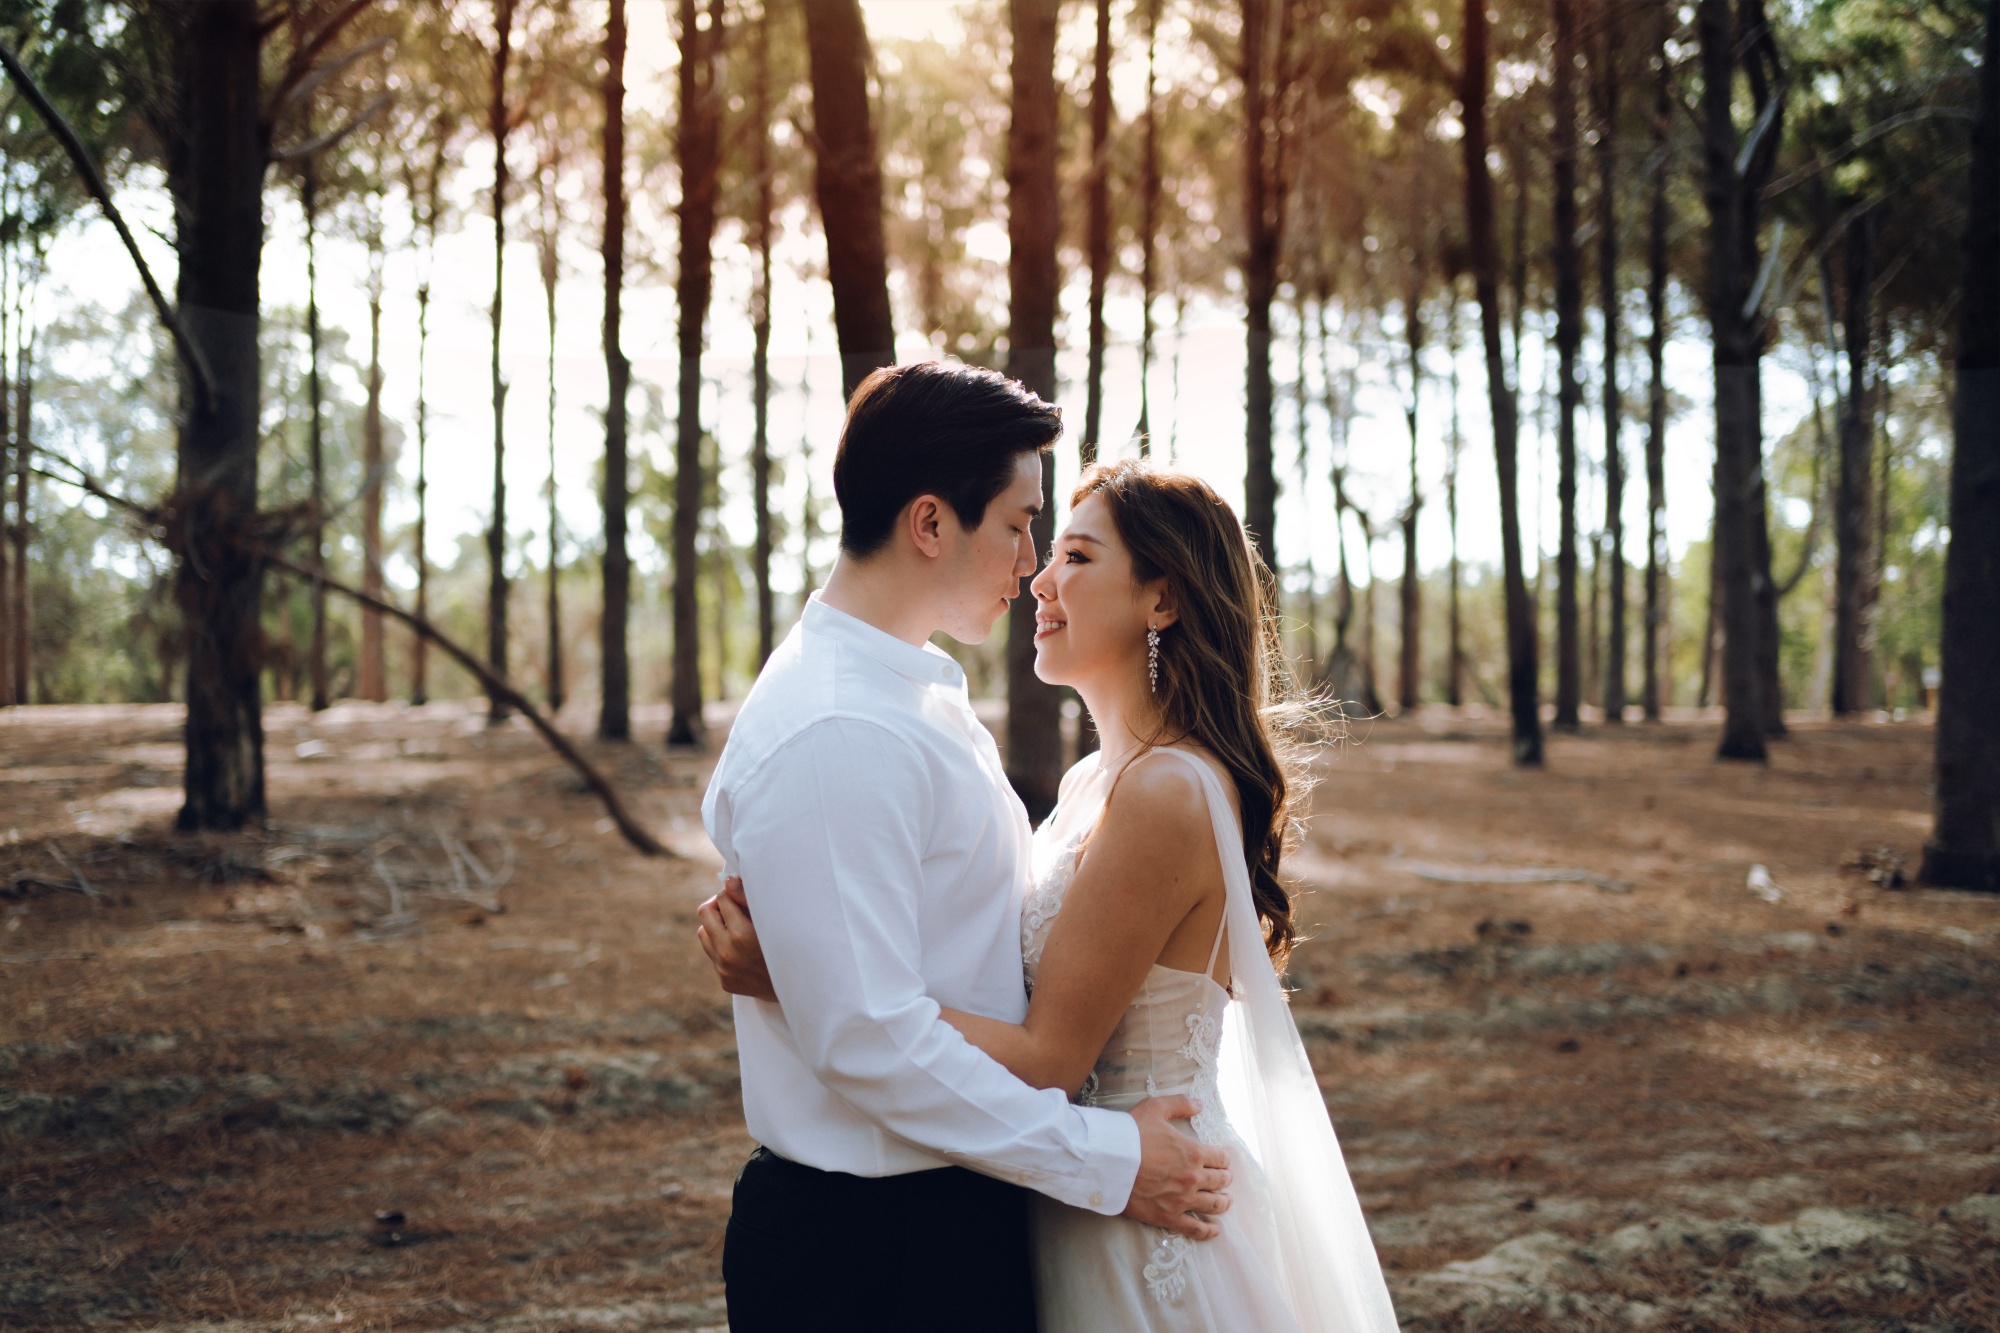 Capturing Forever in Perth: Jasmine & Kamui's Pre-Wedding Story by Jimmy on OneThreeOneFour 6